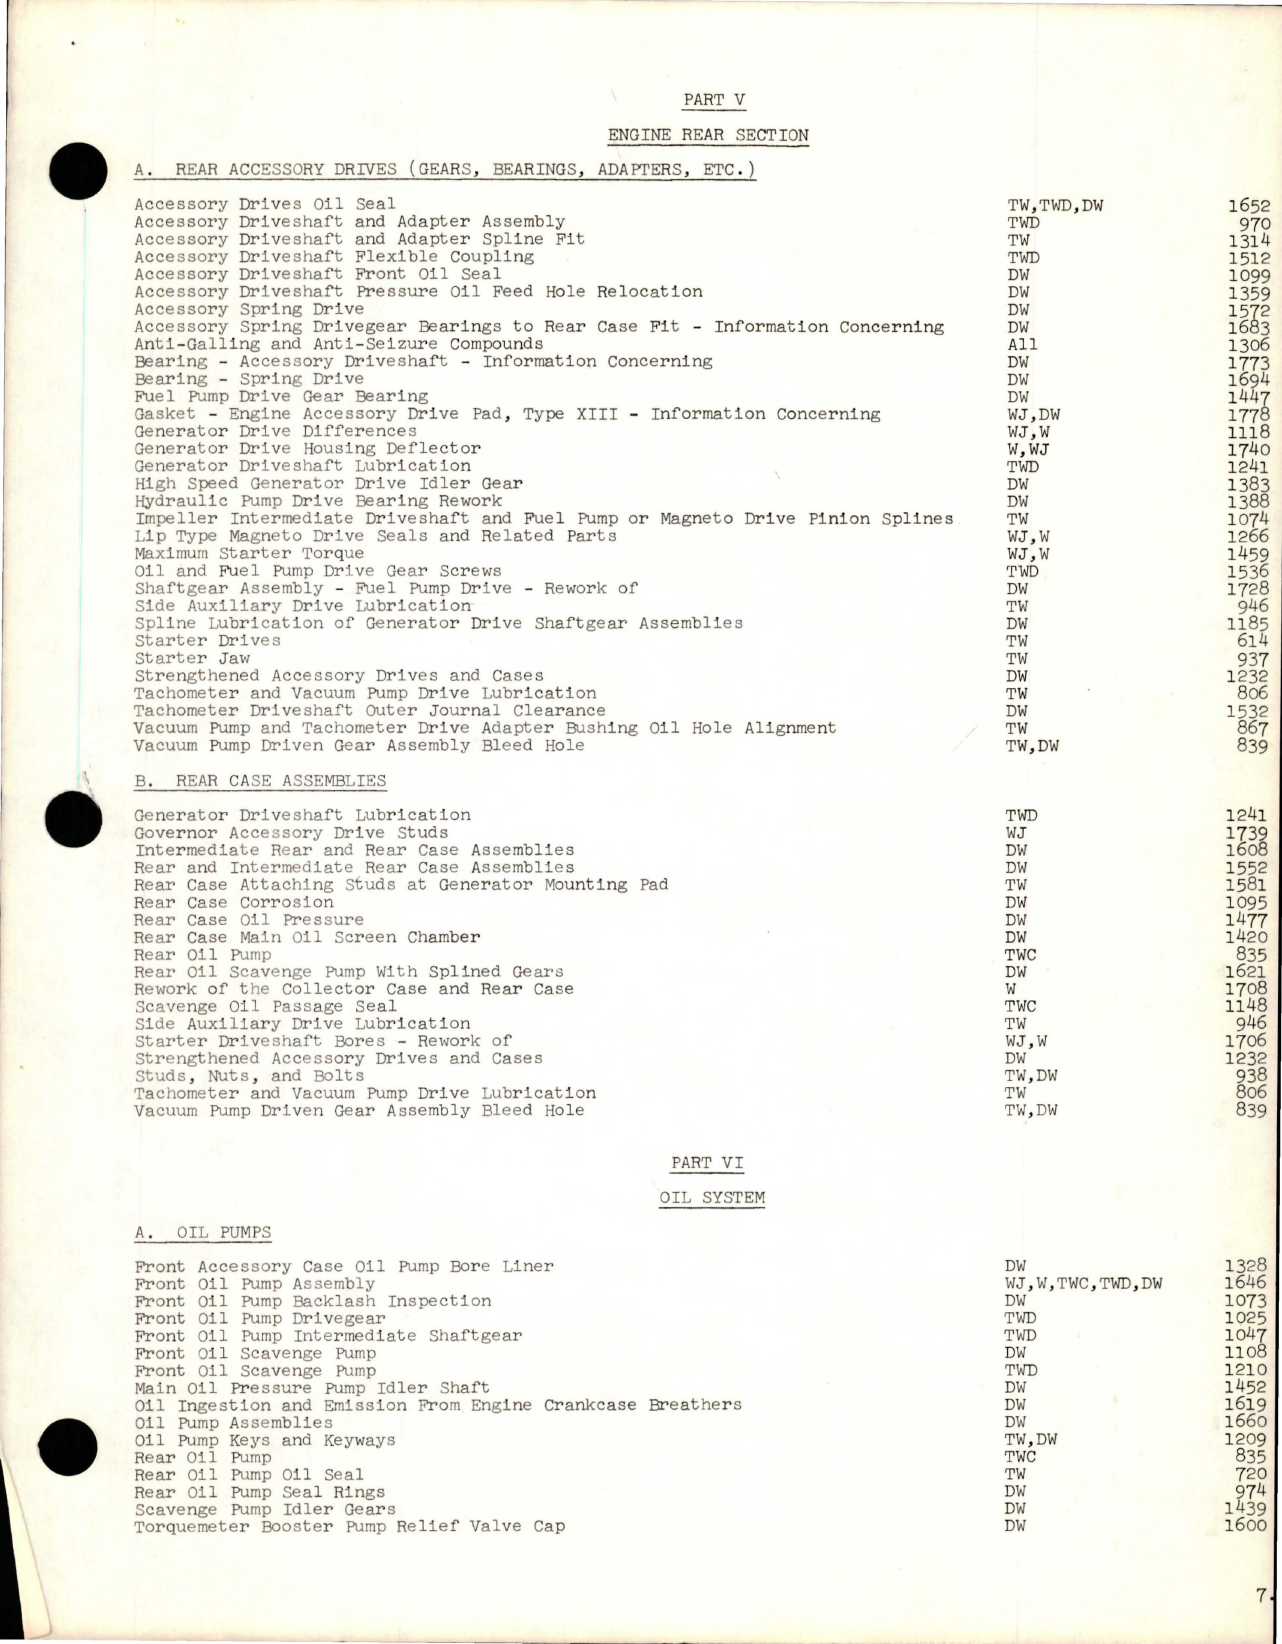 Sample page 7 from AirCorps Library document: Alphabetical and Numerical Listing for Pratt & Whitney Reciprocating Engine